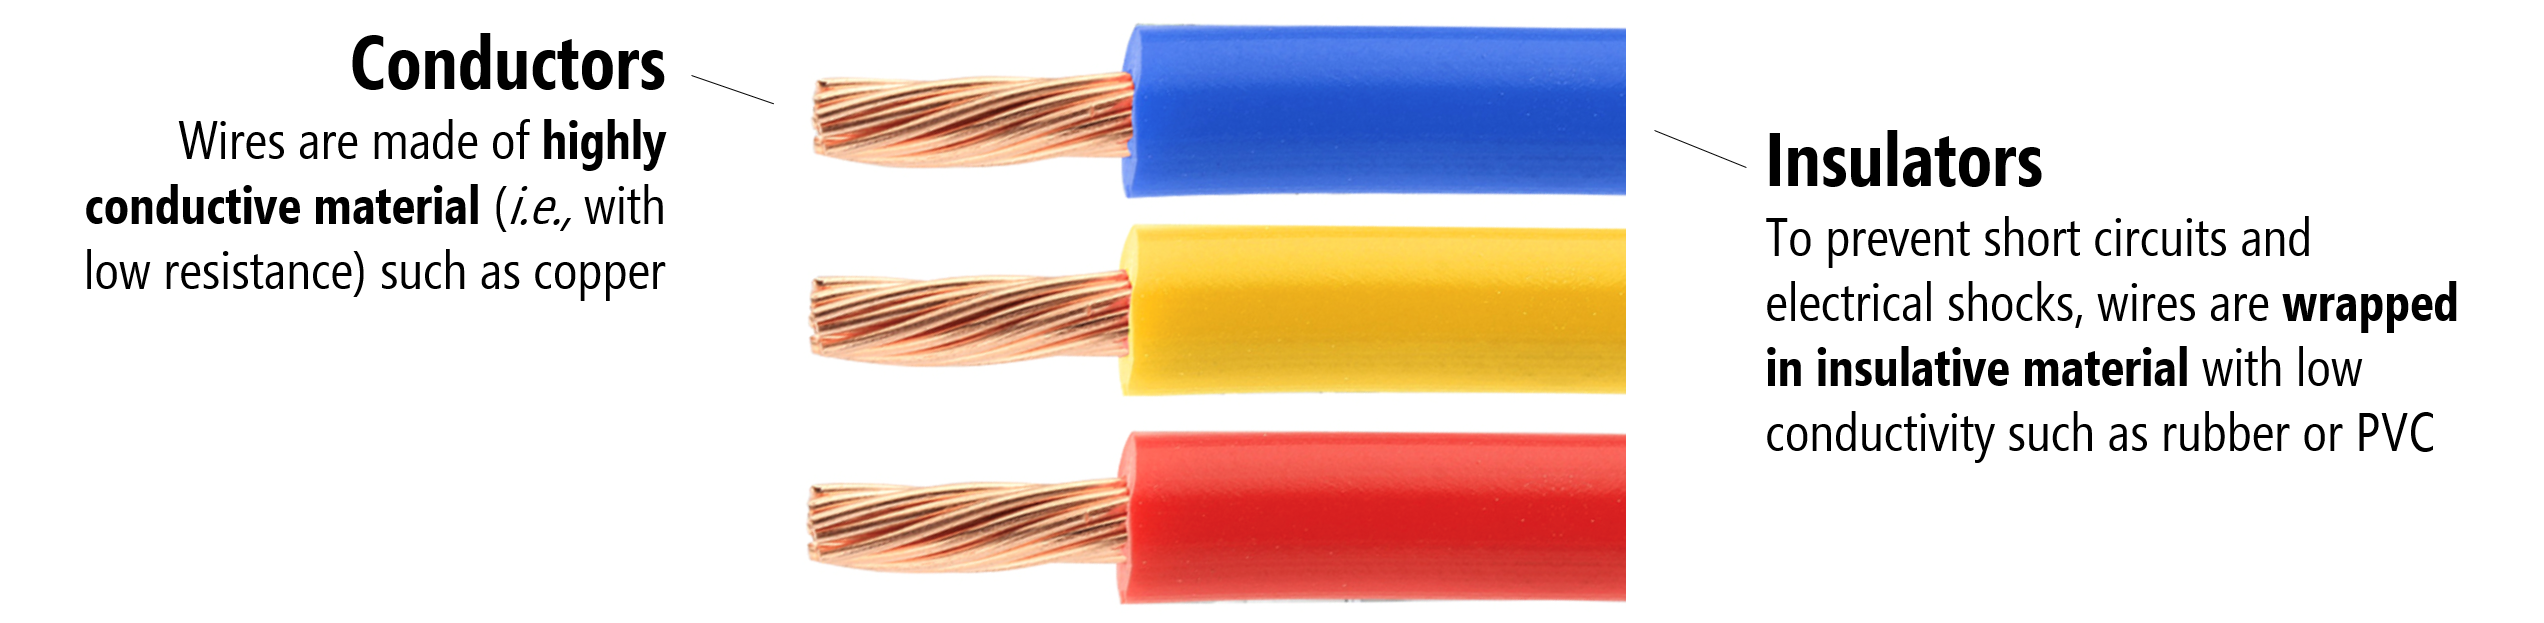 This image shows PVC insulated wire with two annotations: the annotation on the left points to the internal part of the wire, which is highly conductive and made of copper. The annotation on the right points to the insulation around the wire, which has low conductivity and is made of PVC